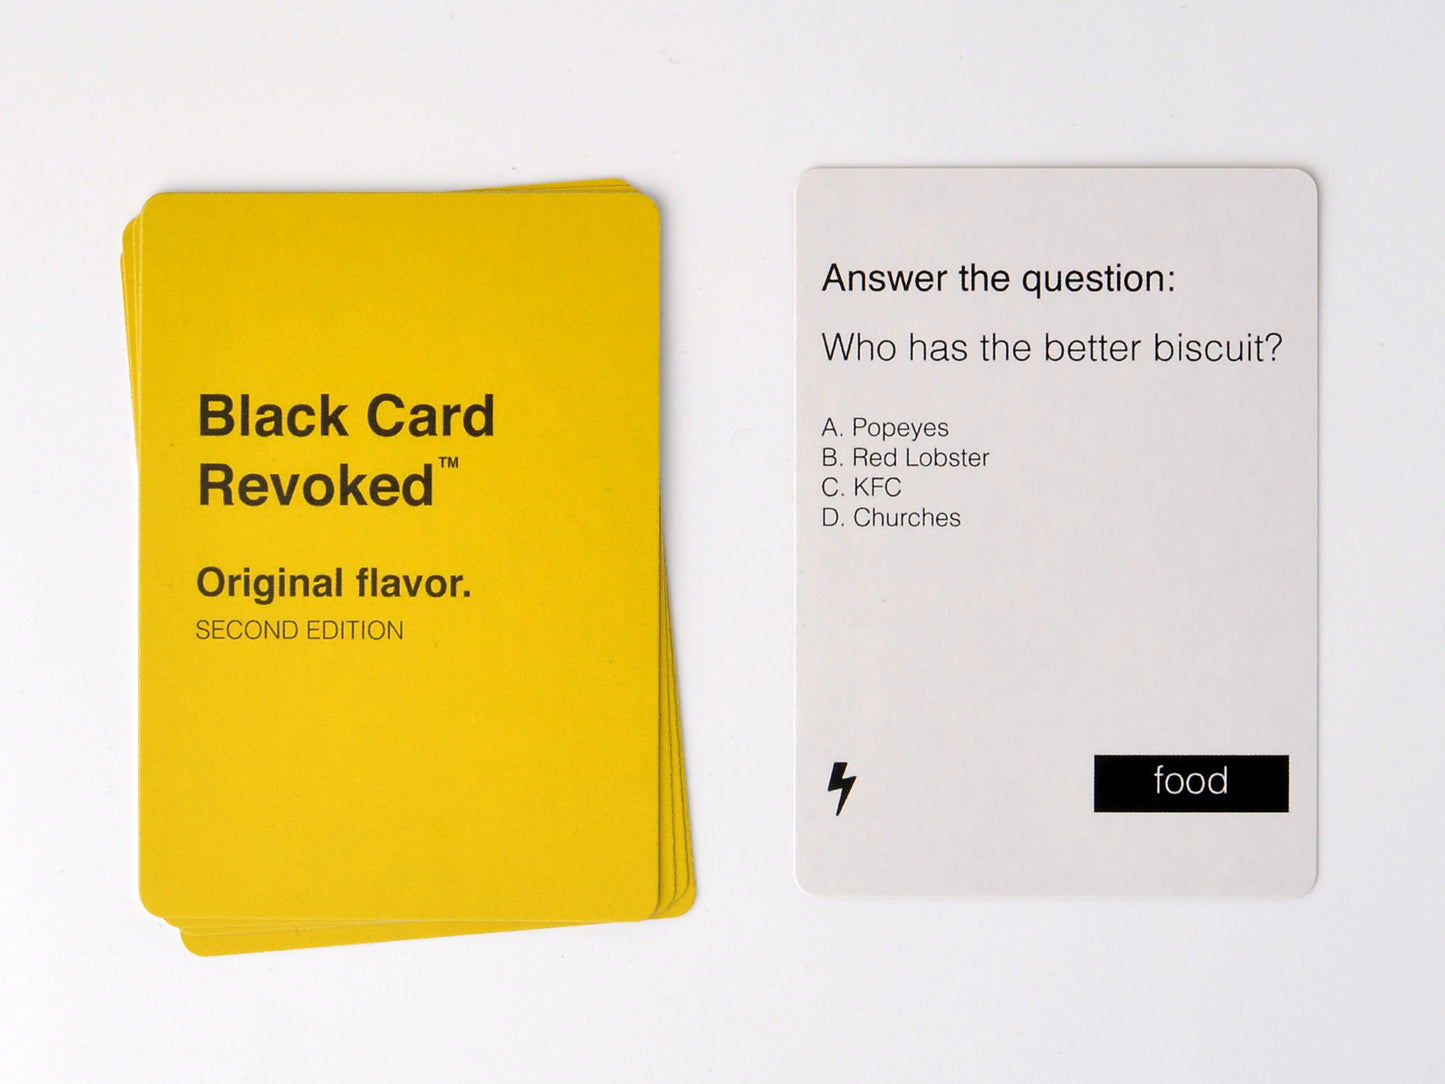 Picture of Black Card Revoked game and cards